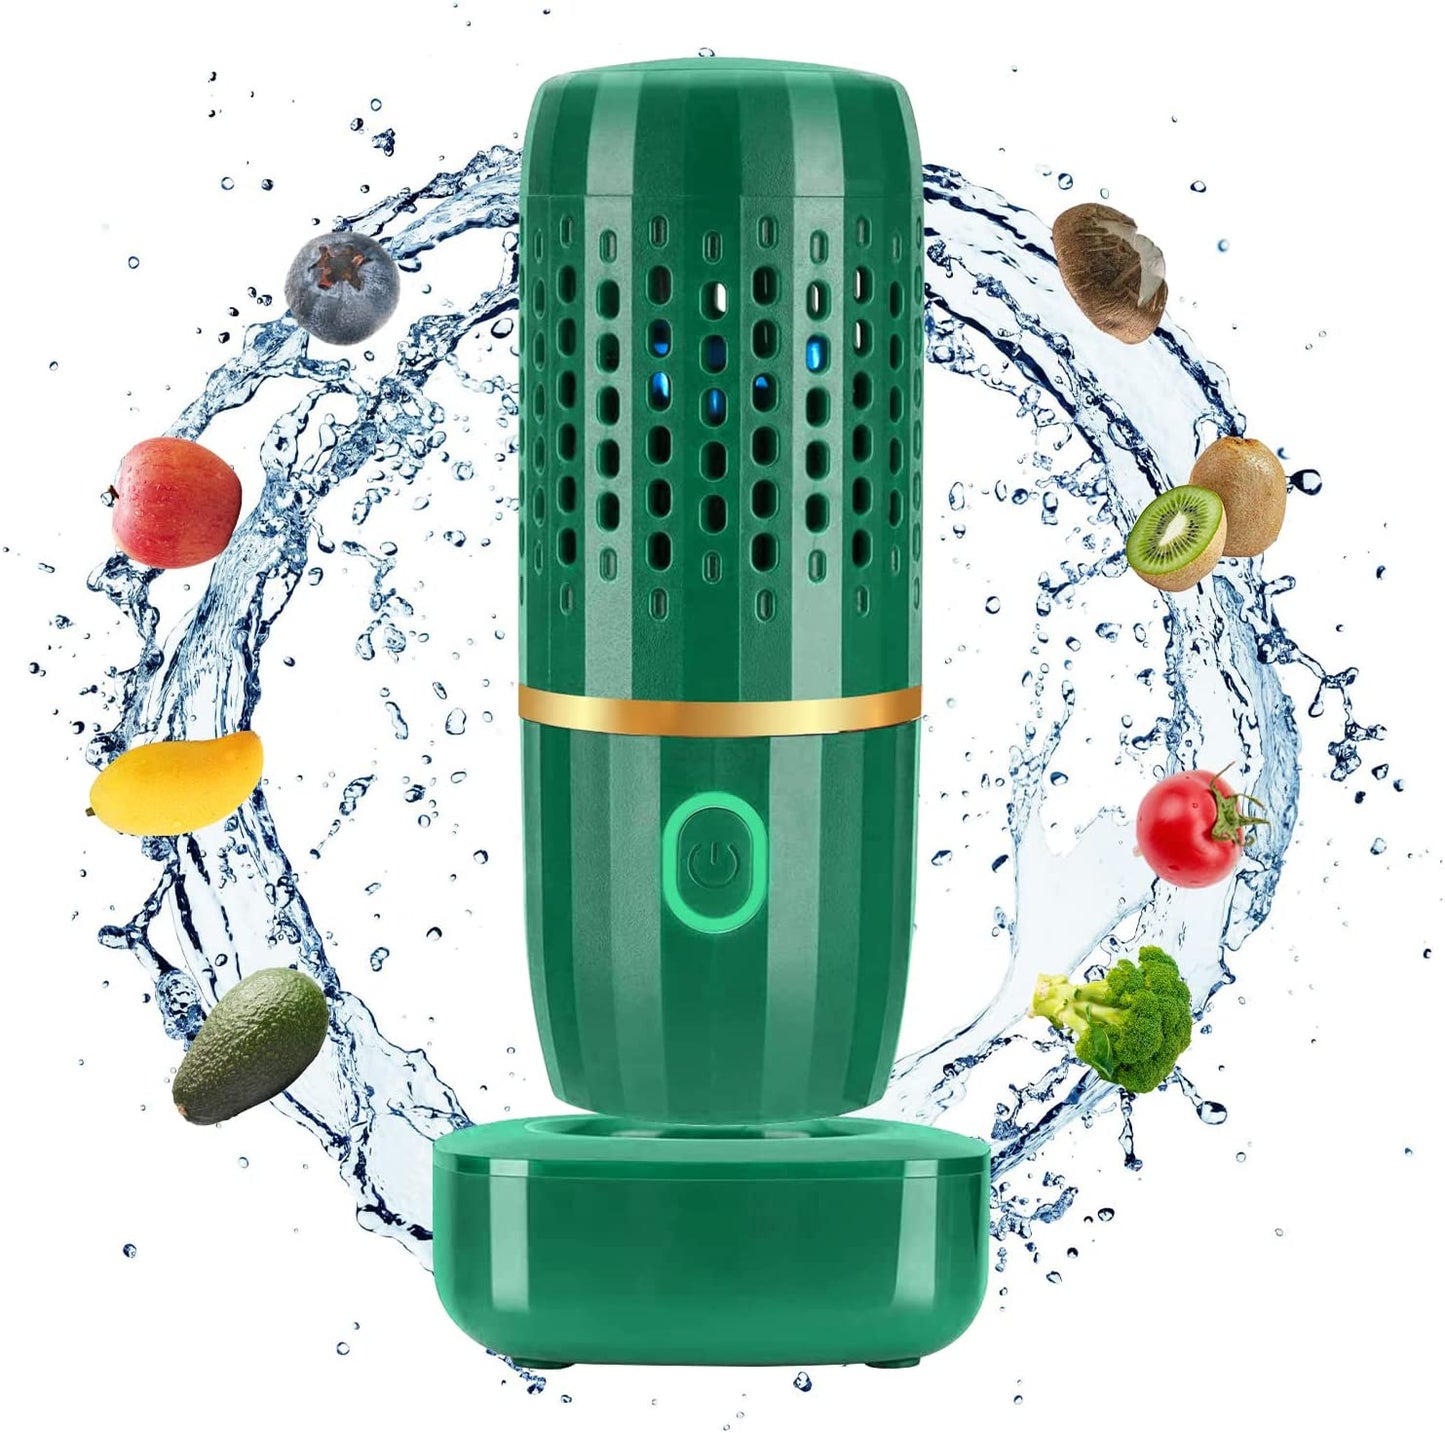 Fruit And Vegetable Washing Machine, Aqua Pure Purifier For Fruit, Vegetable  Cleaner, Fruit Cleaner Device In Water With Oh-ion Purification Technolog